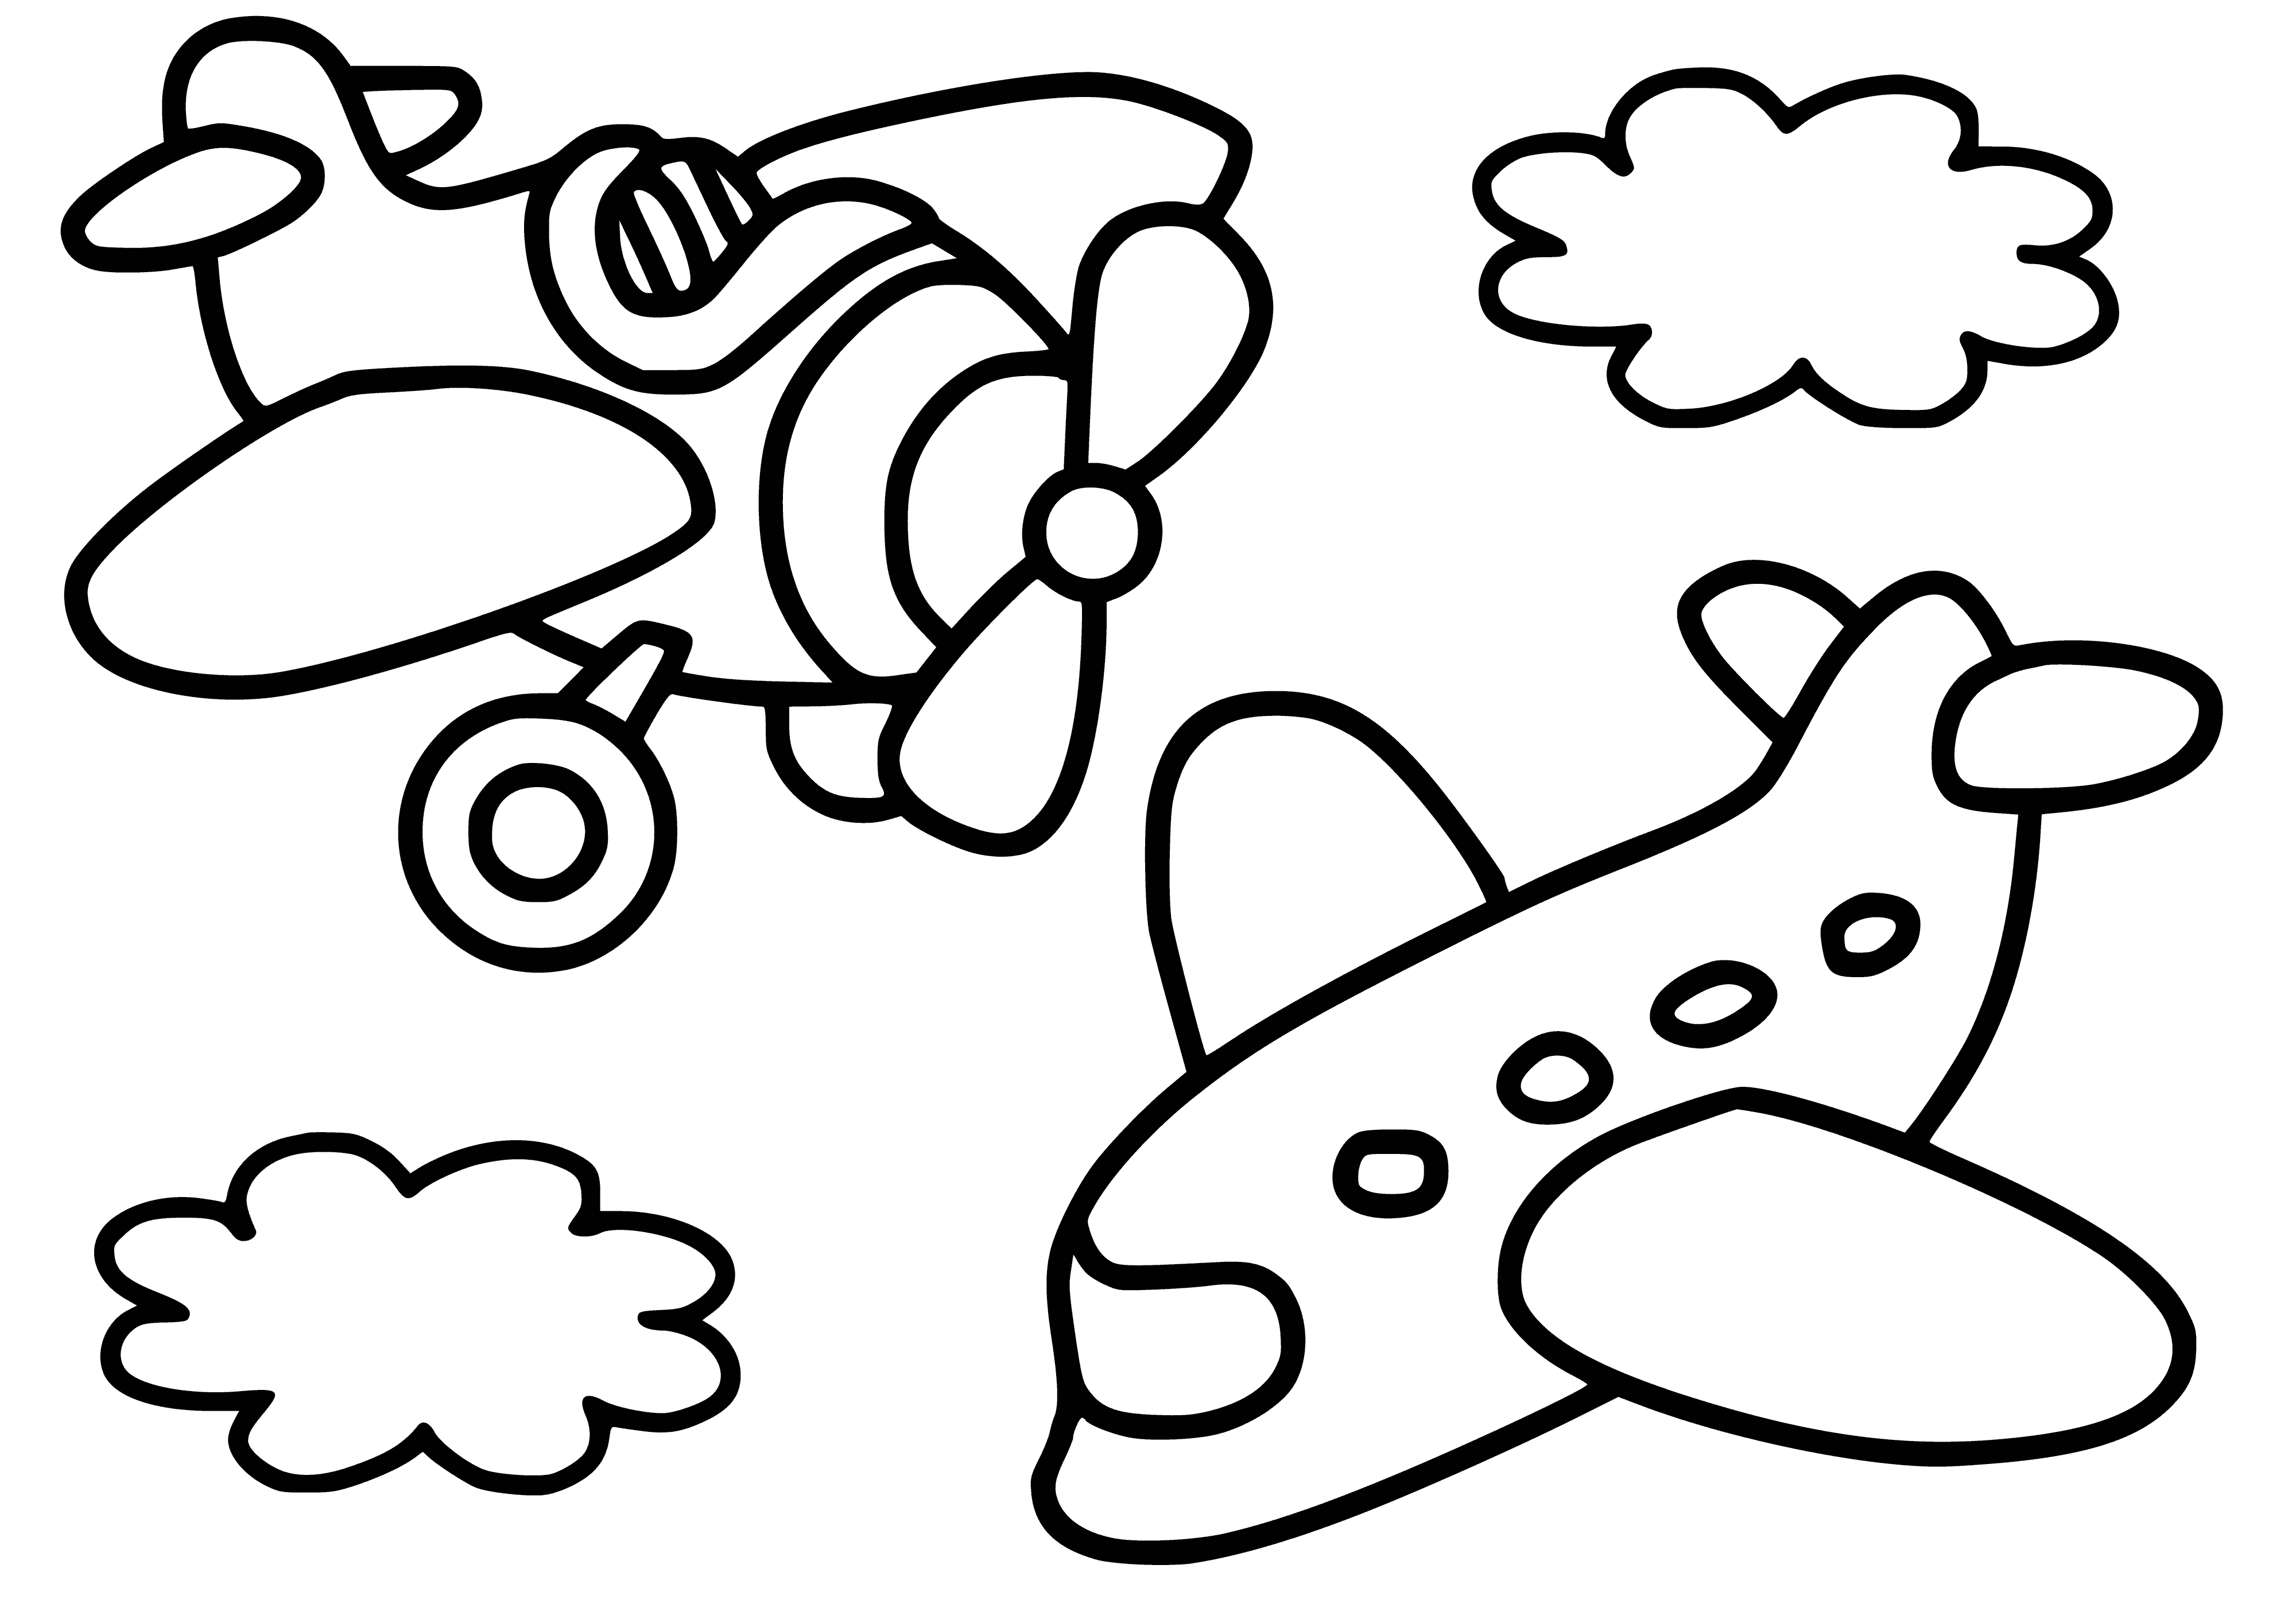 Airplanes coloring page